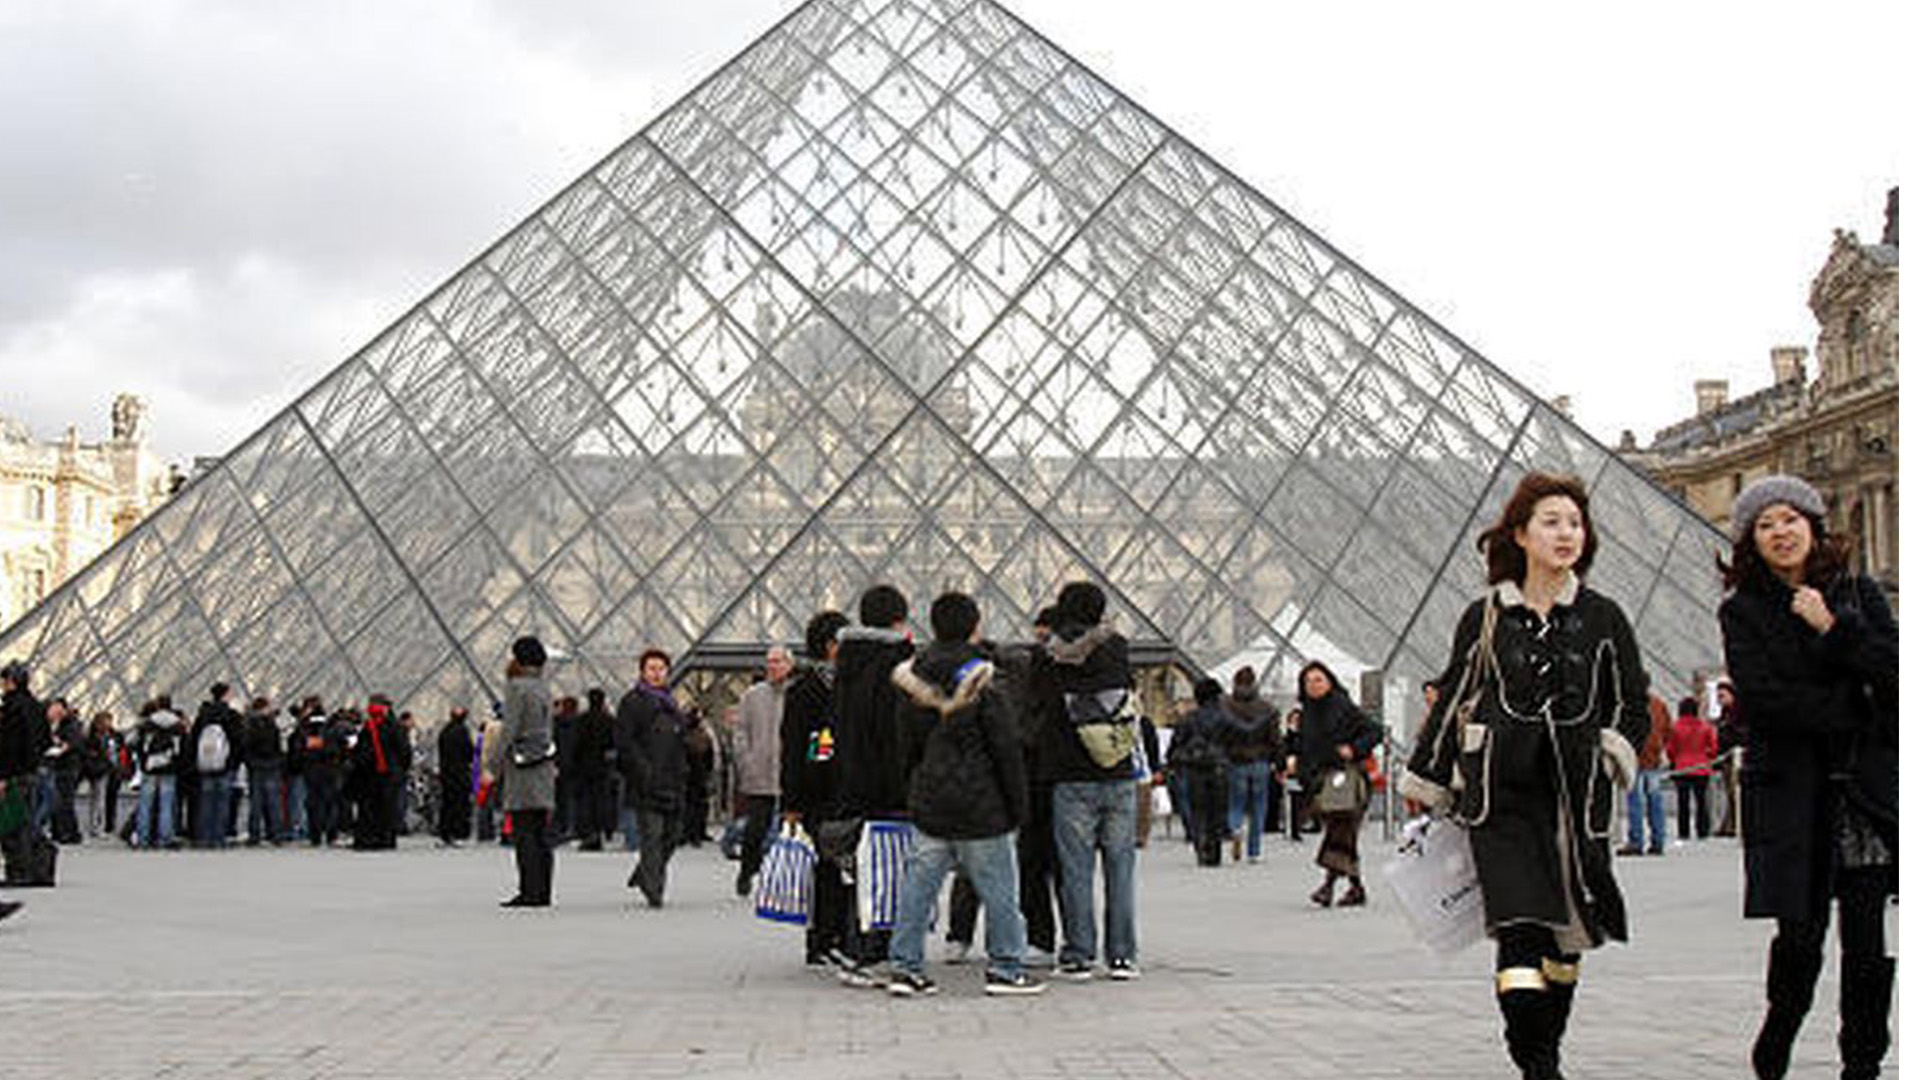 London National Gallery and Louvre Museum in Paris in Europe Re-opening After Months of Covid-19 Lockdown